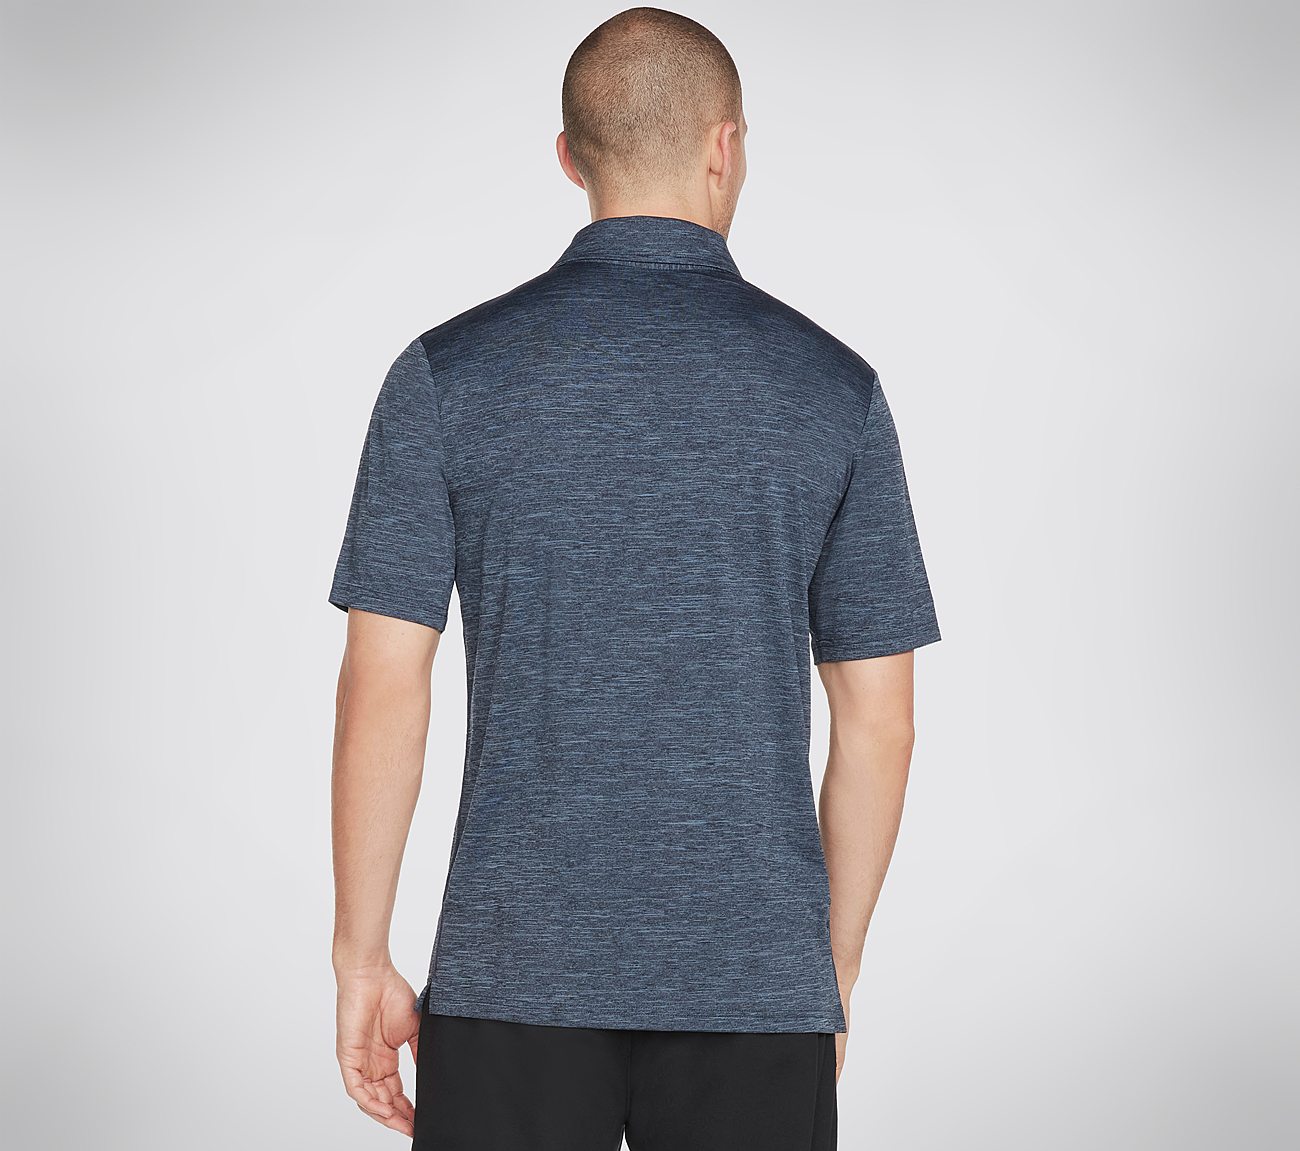 ON THE ROAD POLO, BLUE/GREY Apparels Top View